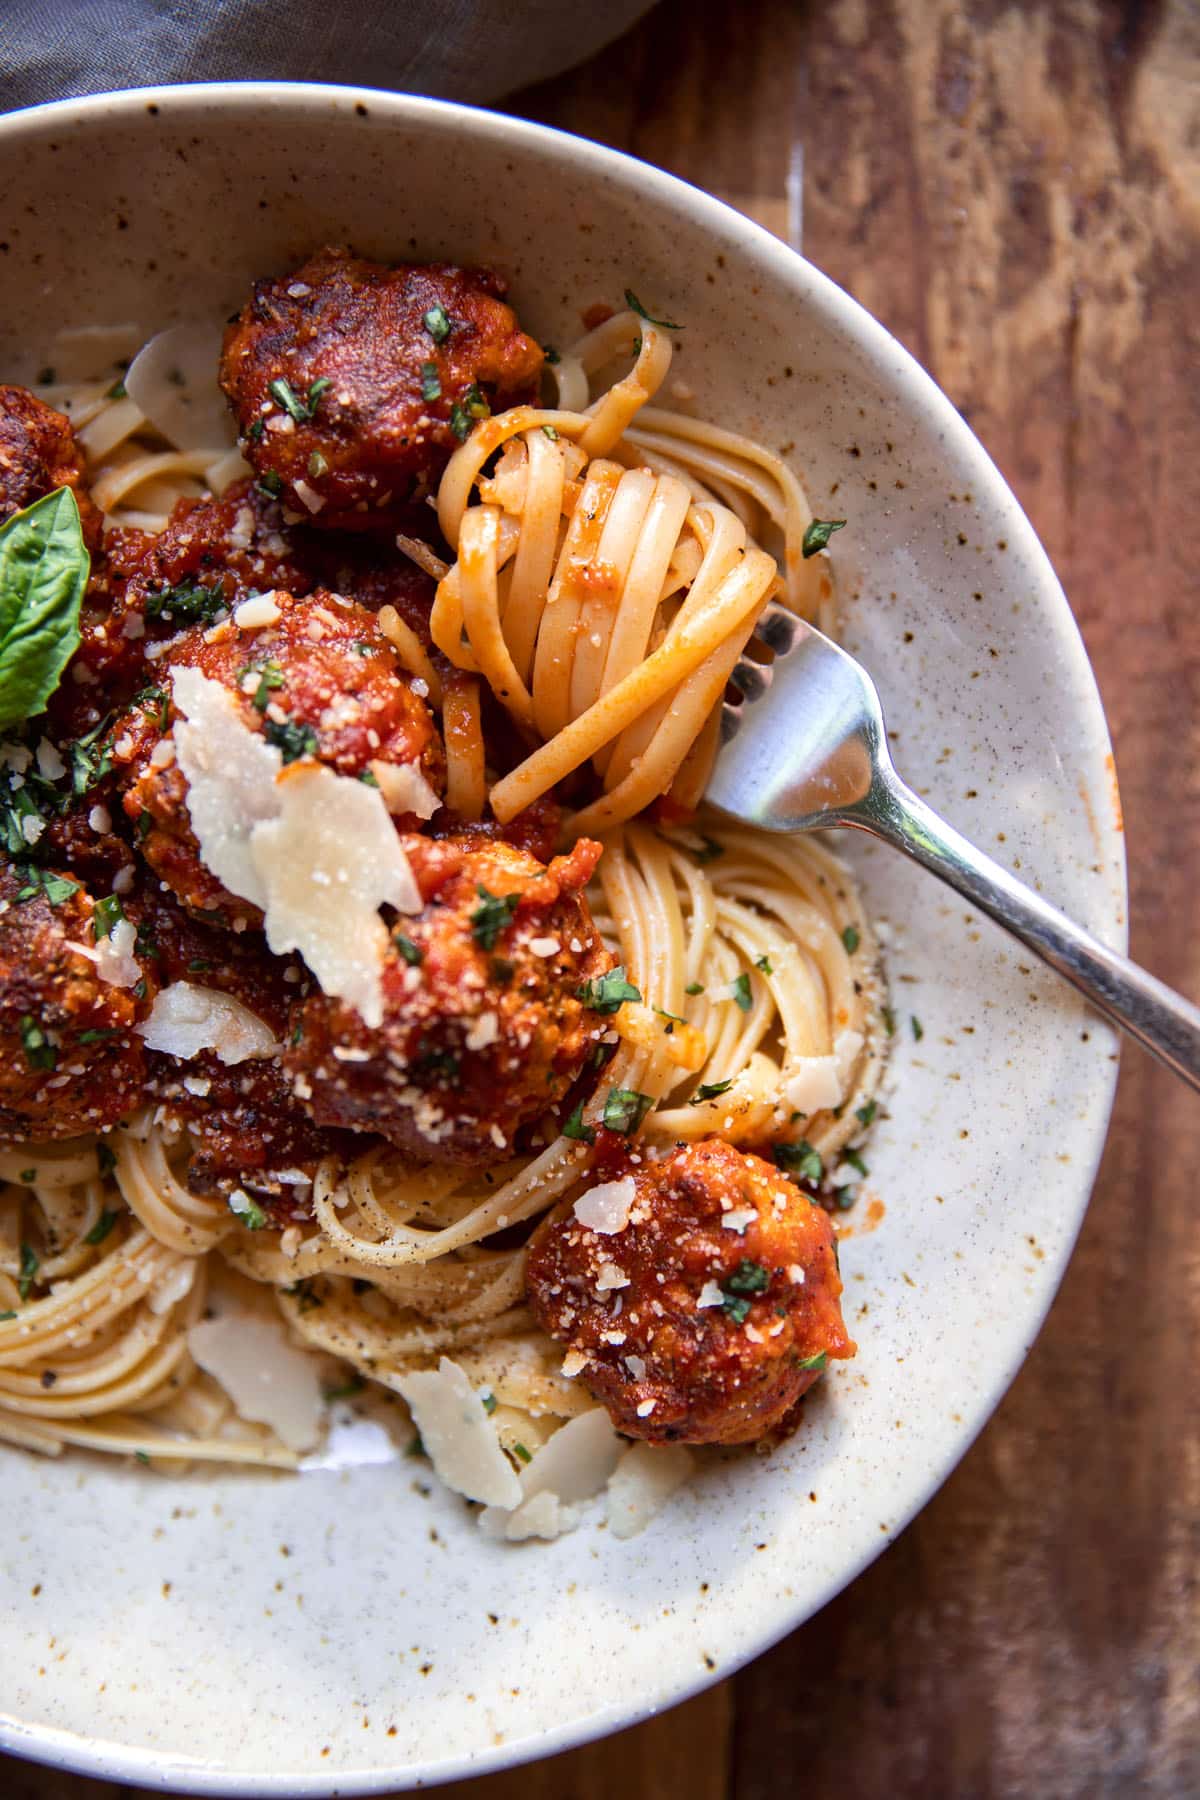 linguine pasta with herb turkey meatballs and pasta sauce